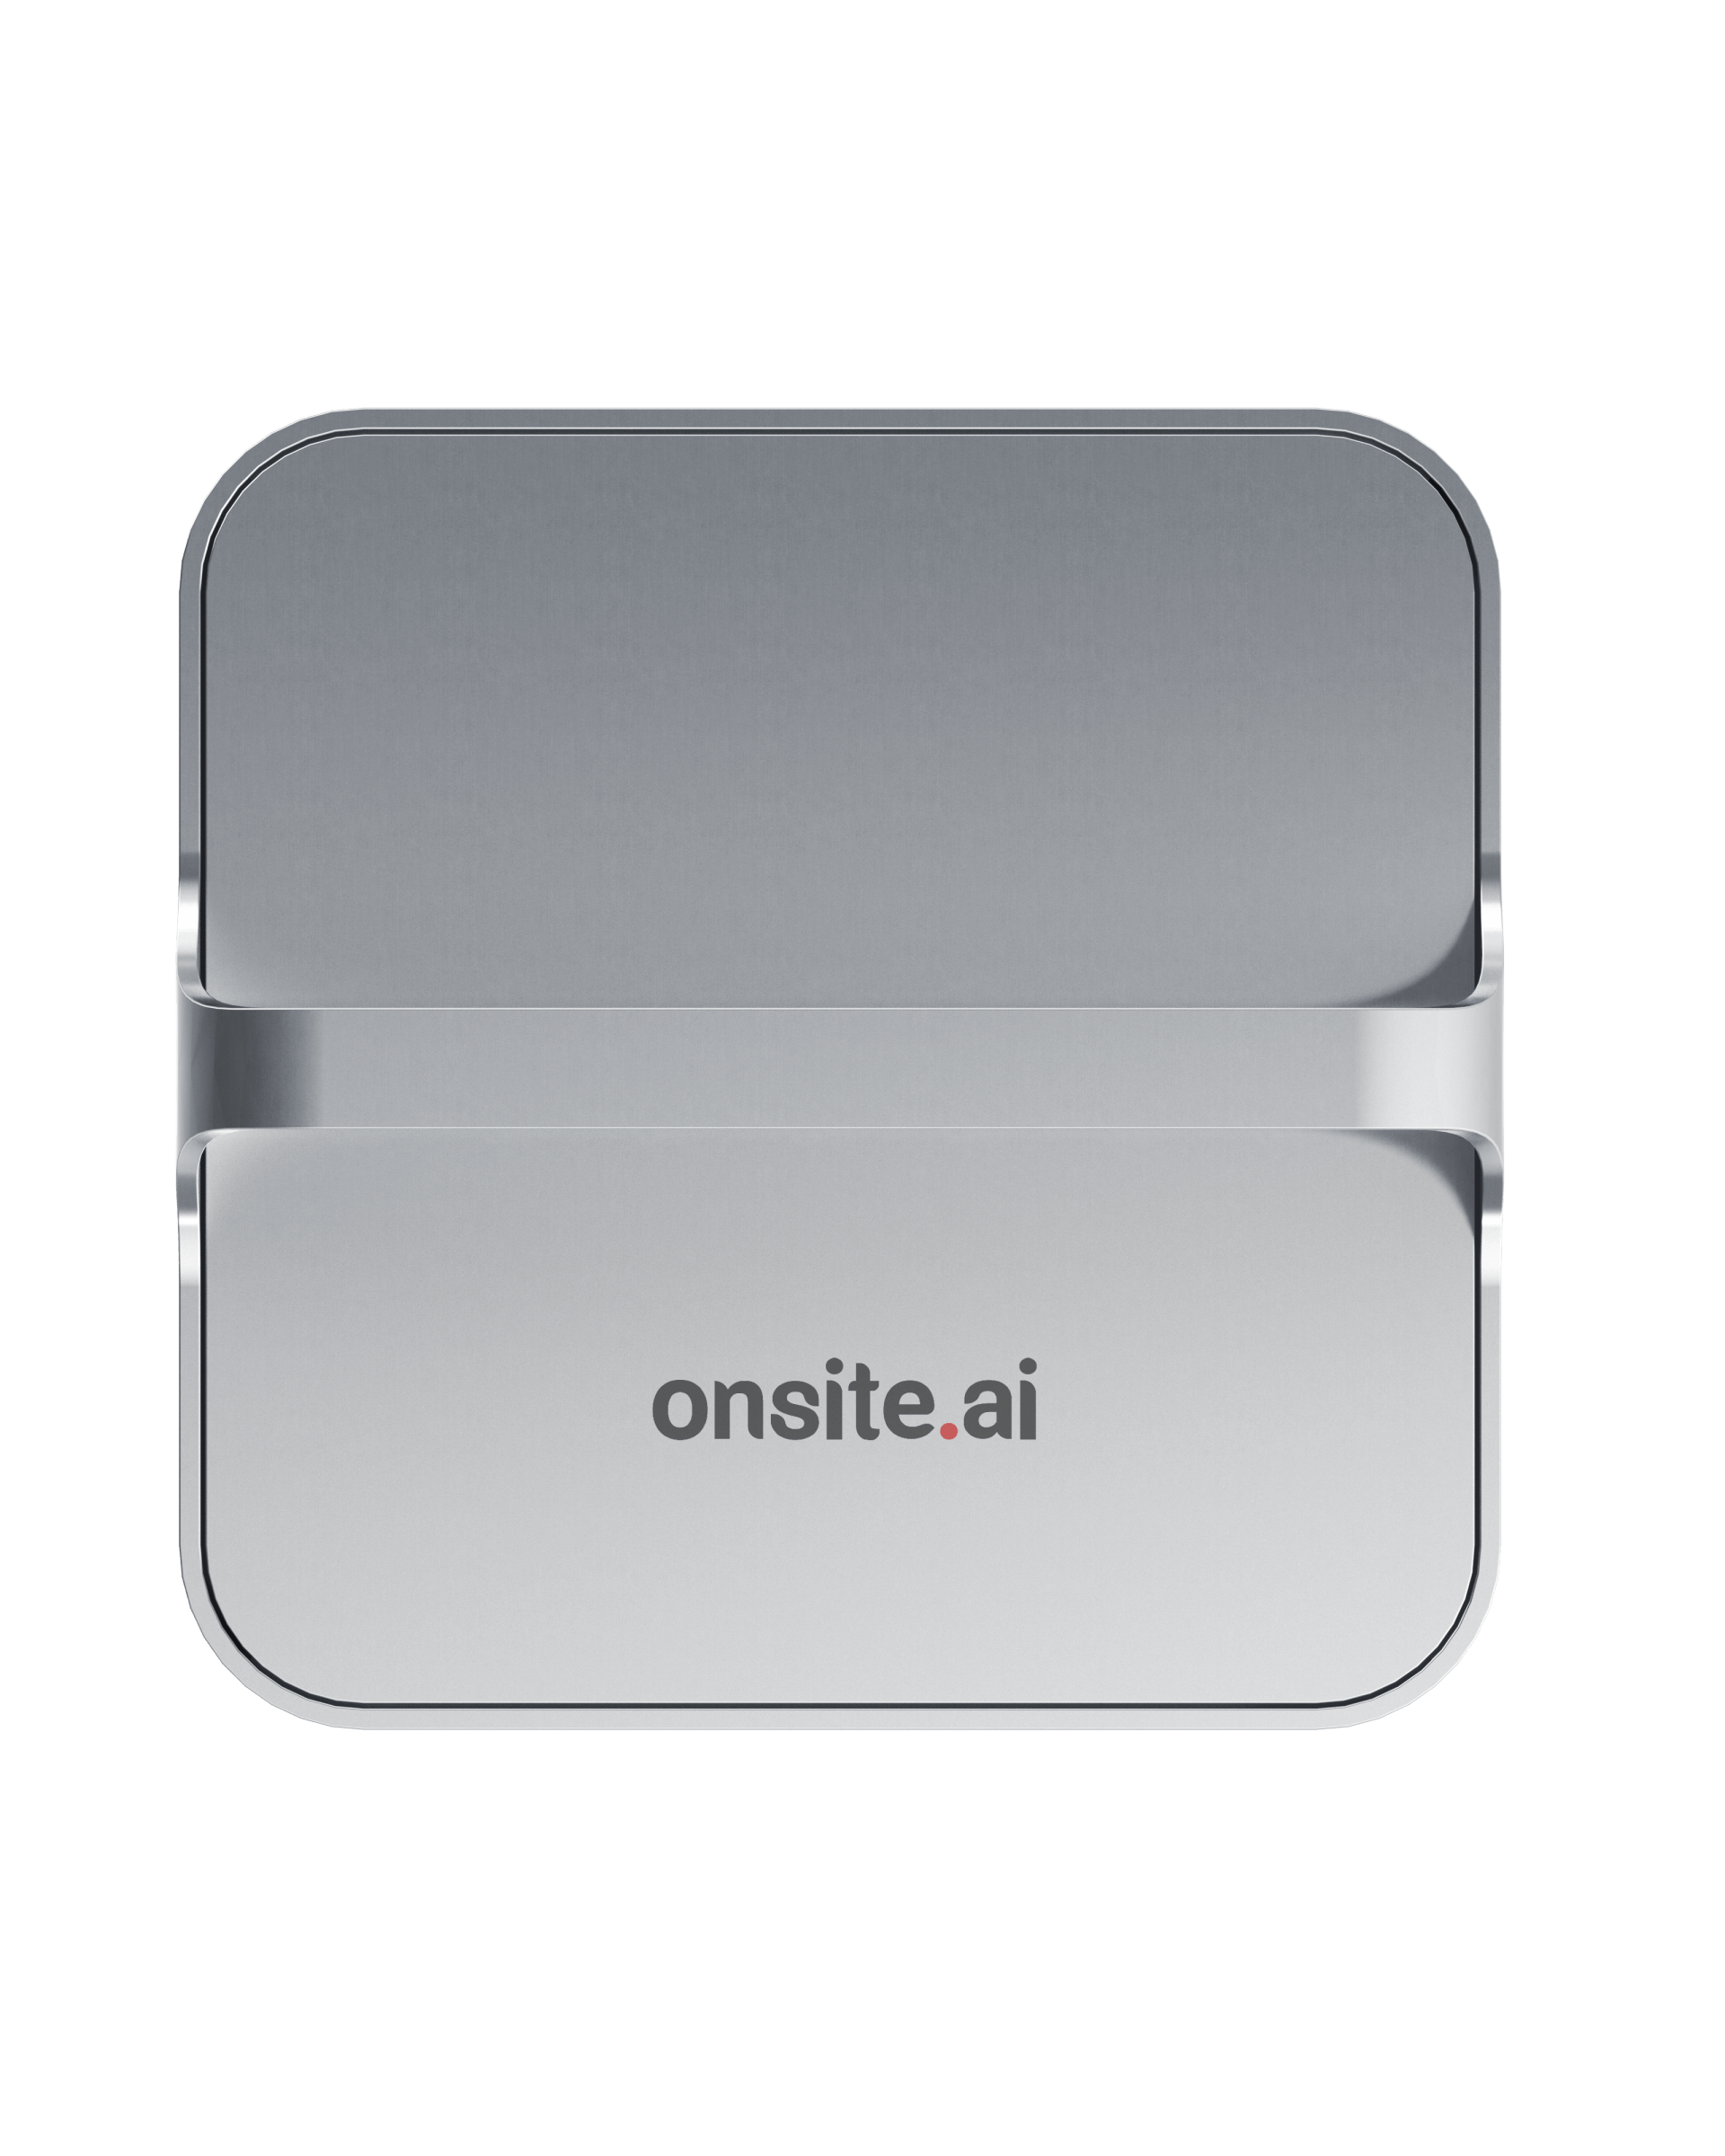 onsite.ai device - top view